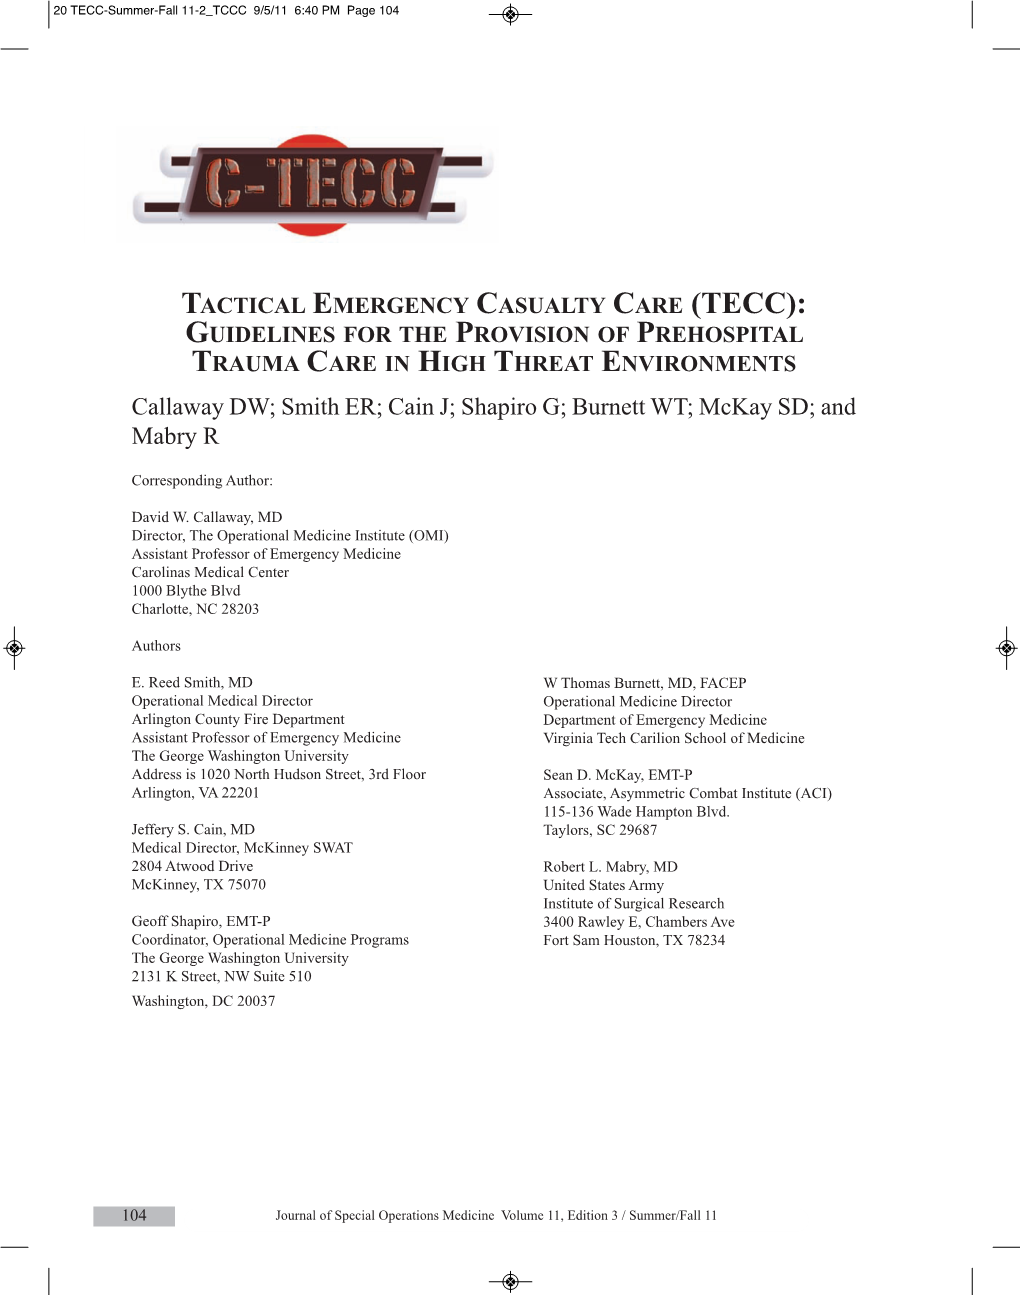 Tactical Emergency Casualty Care (TECC): Guidelines for the Provision of Prehospital Trauma Care in High Threat